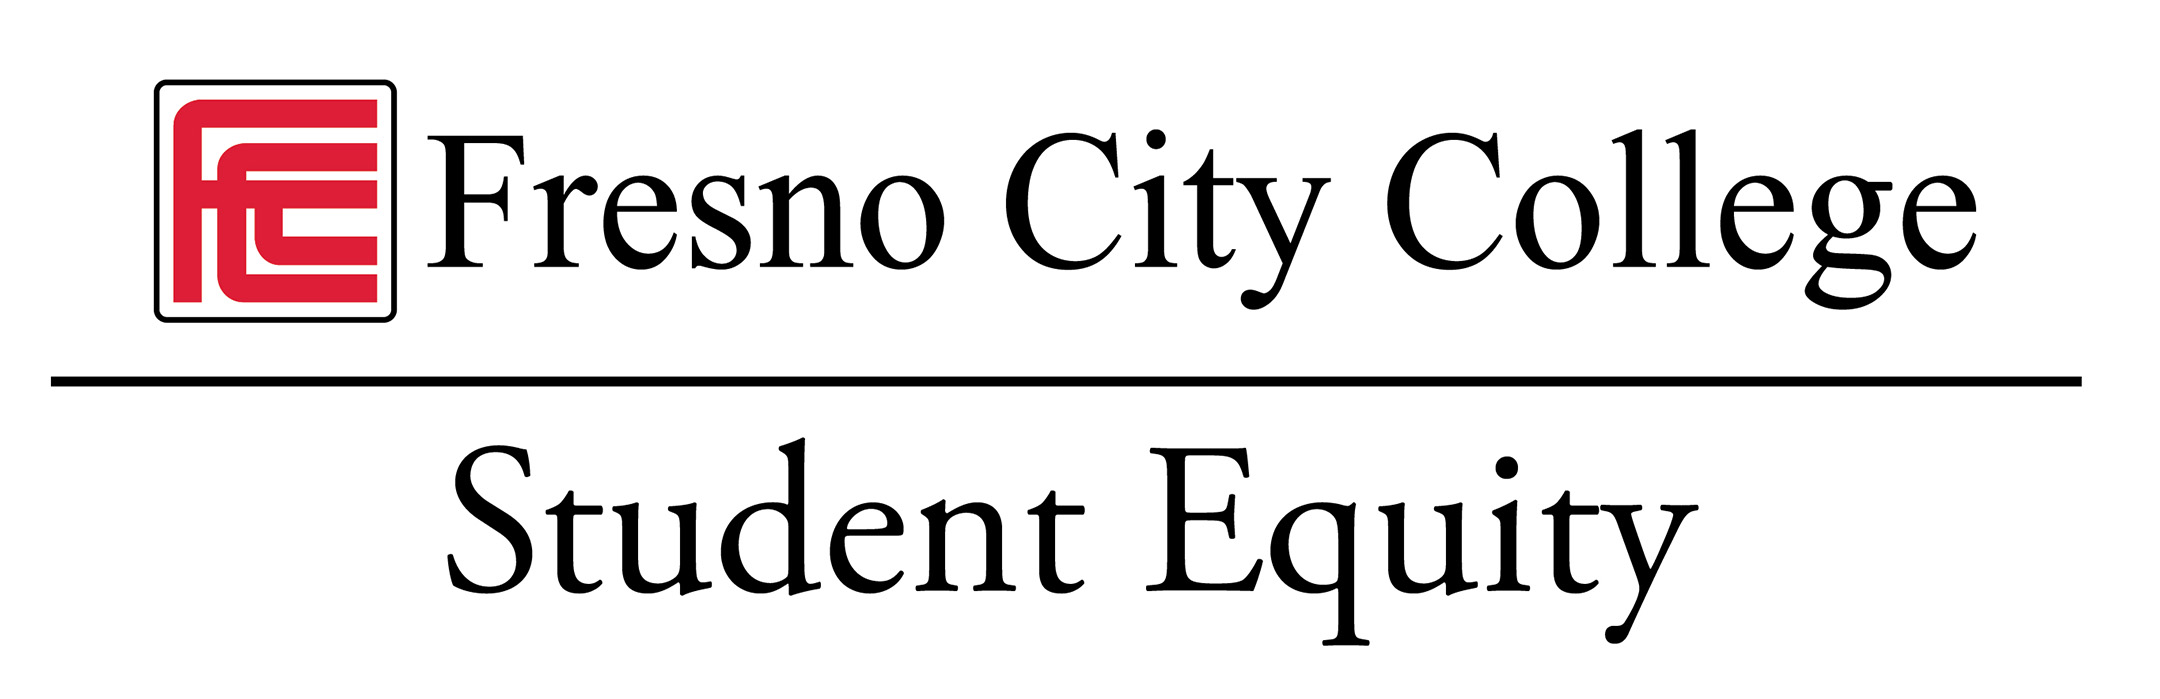 Fresno City College International Student Equity Graphic